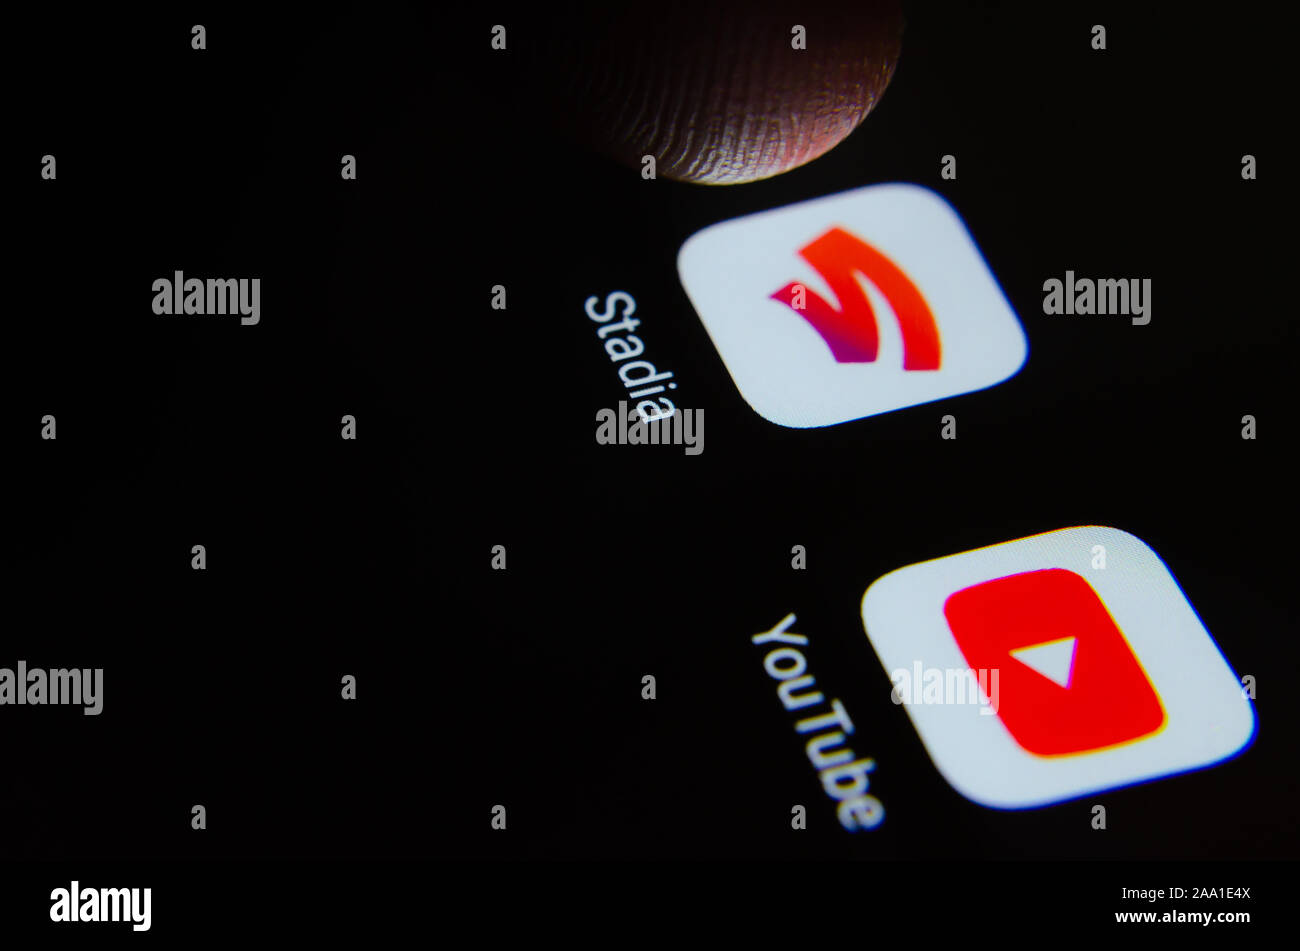 Google Stadia and Youtube apps on the smartphone screen and a finger above it prepared to launch Stadia. Stock Photo